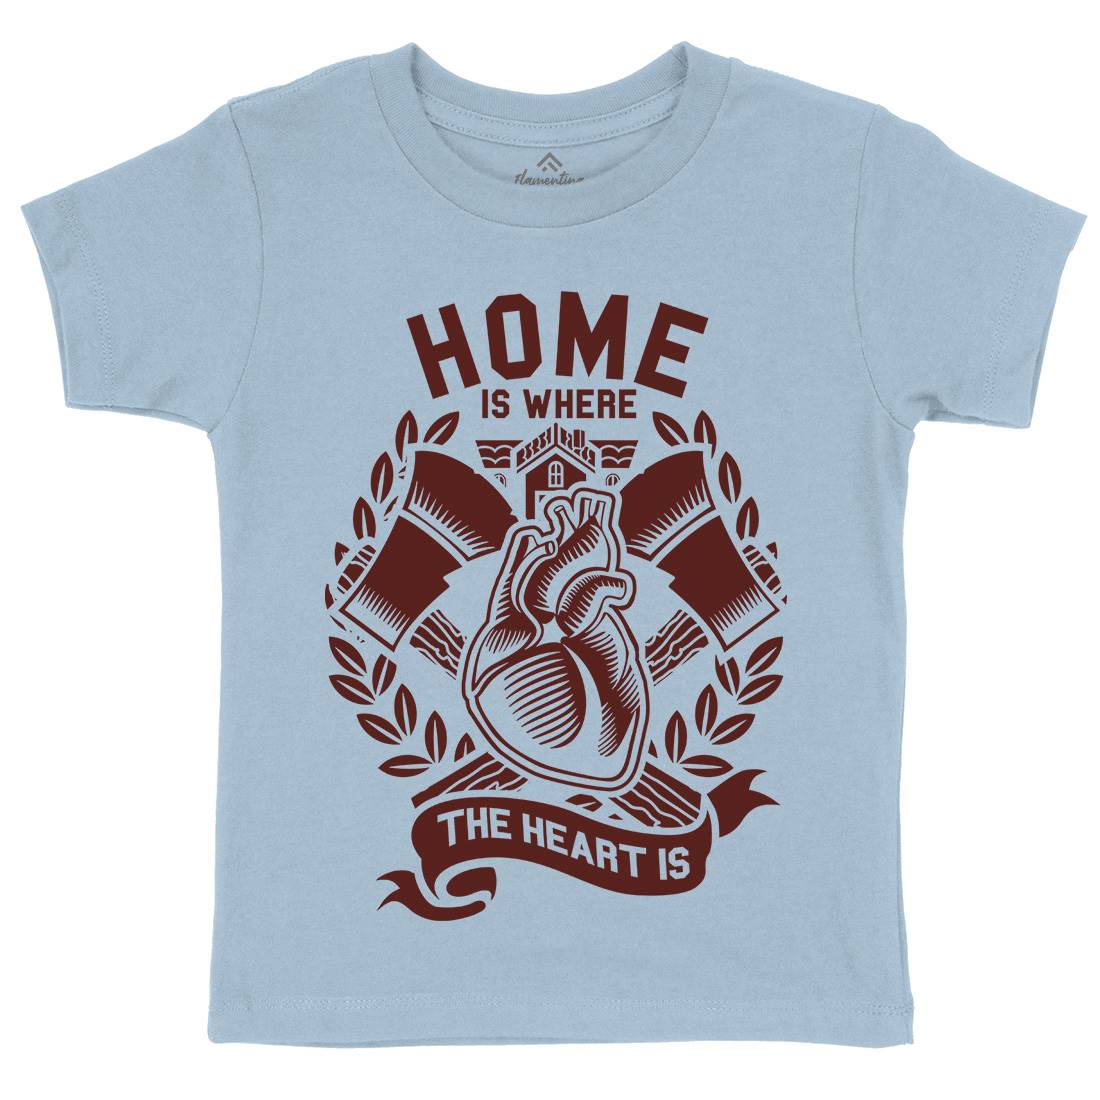 Home Kids Crew Neck T-Shirt Quotes A241